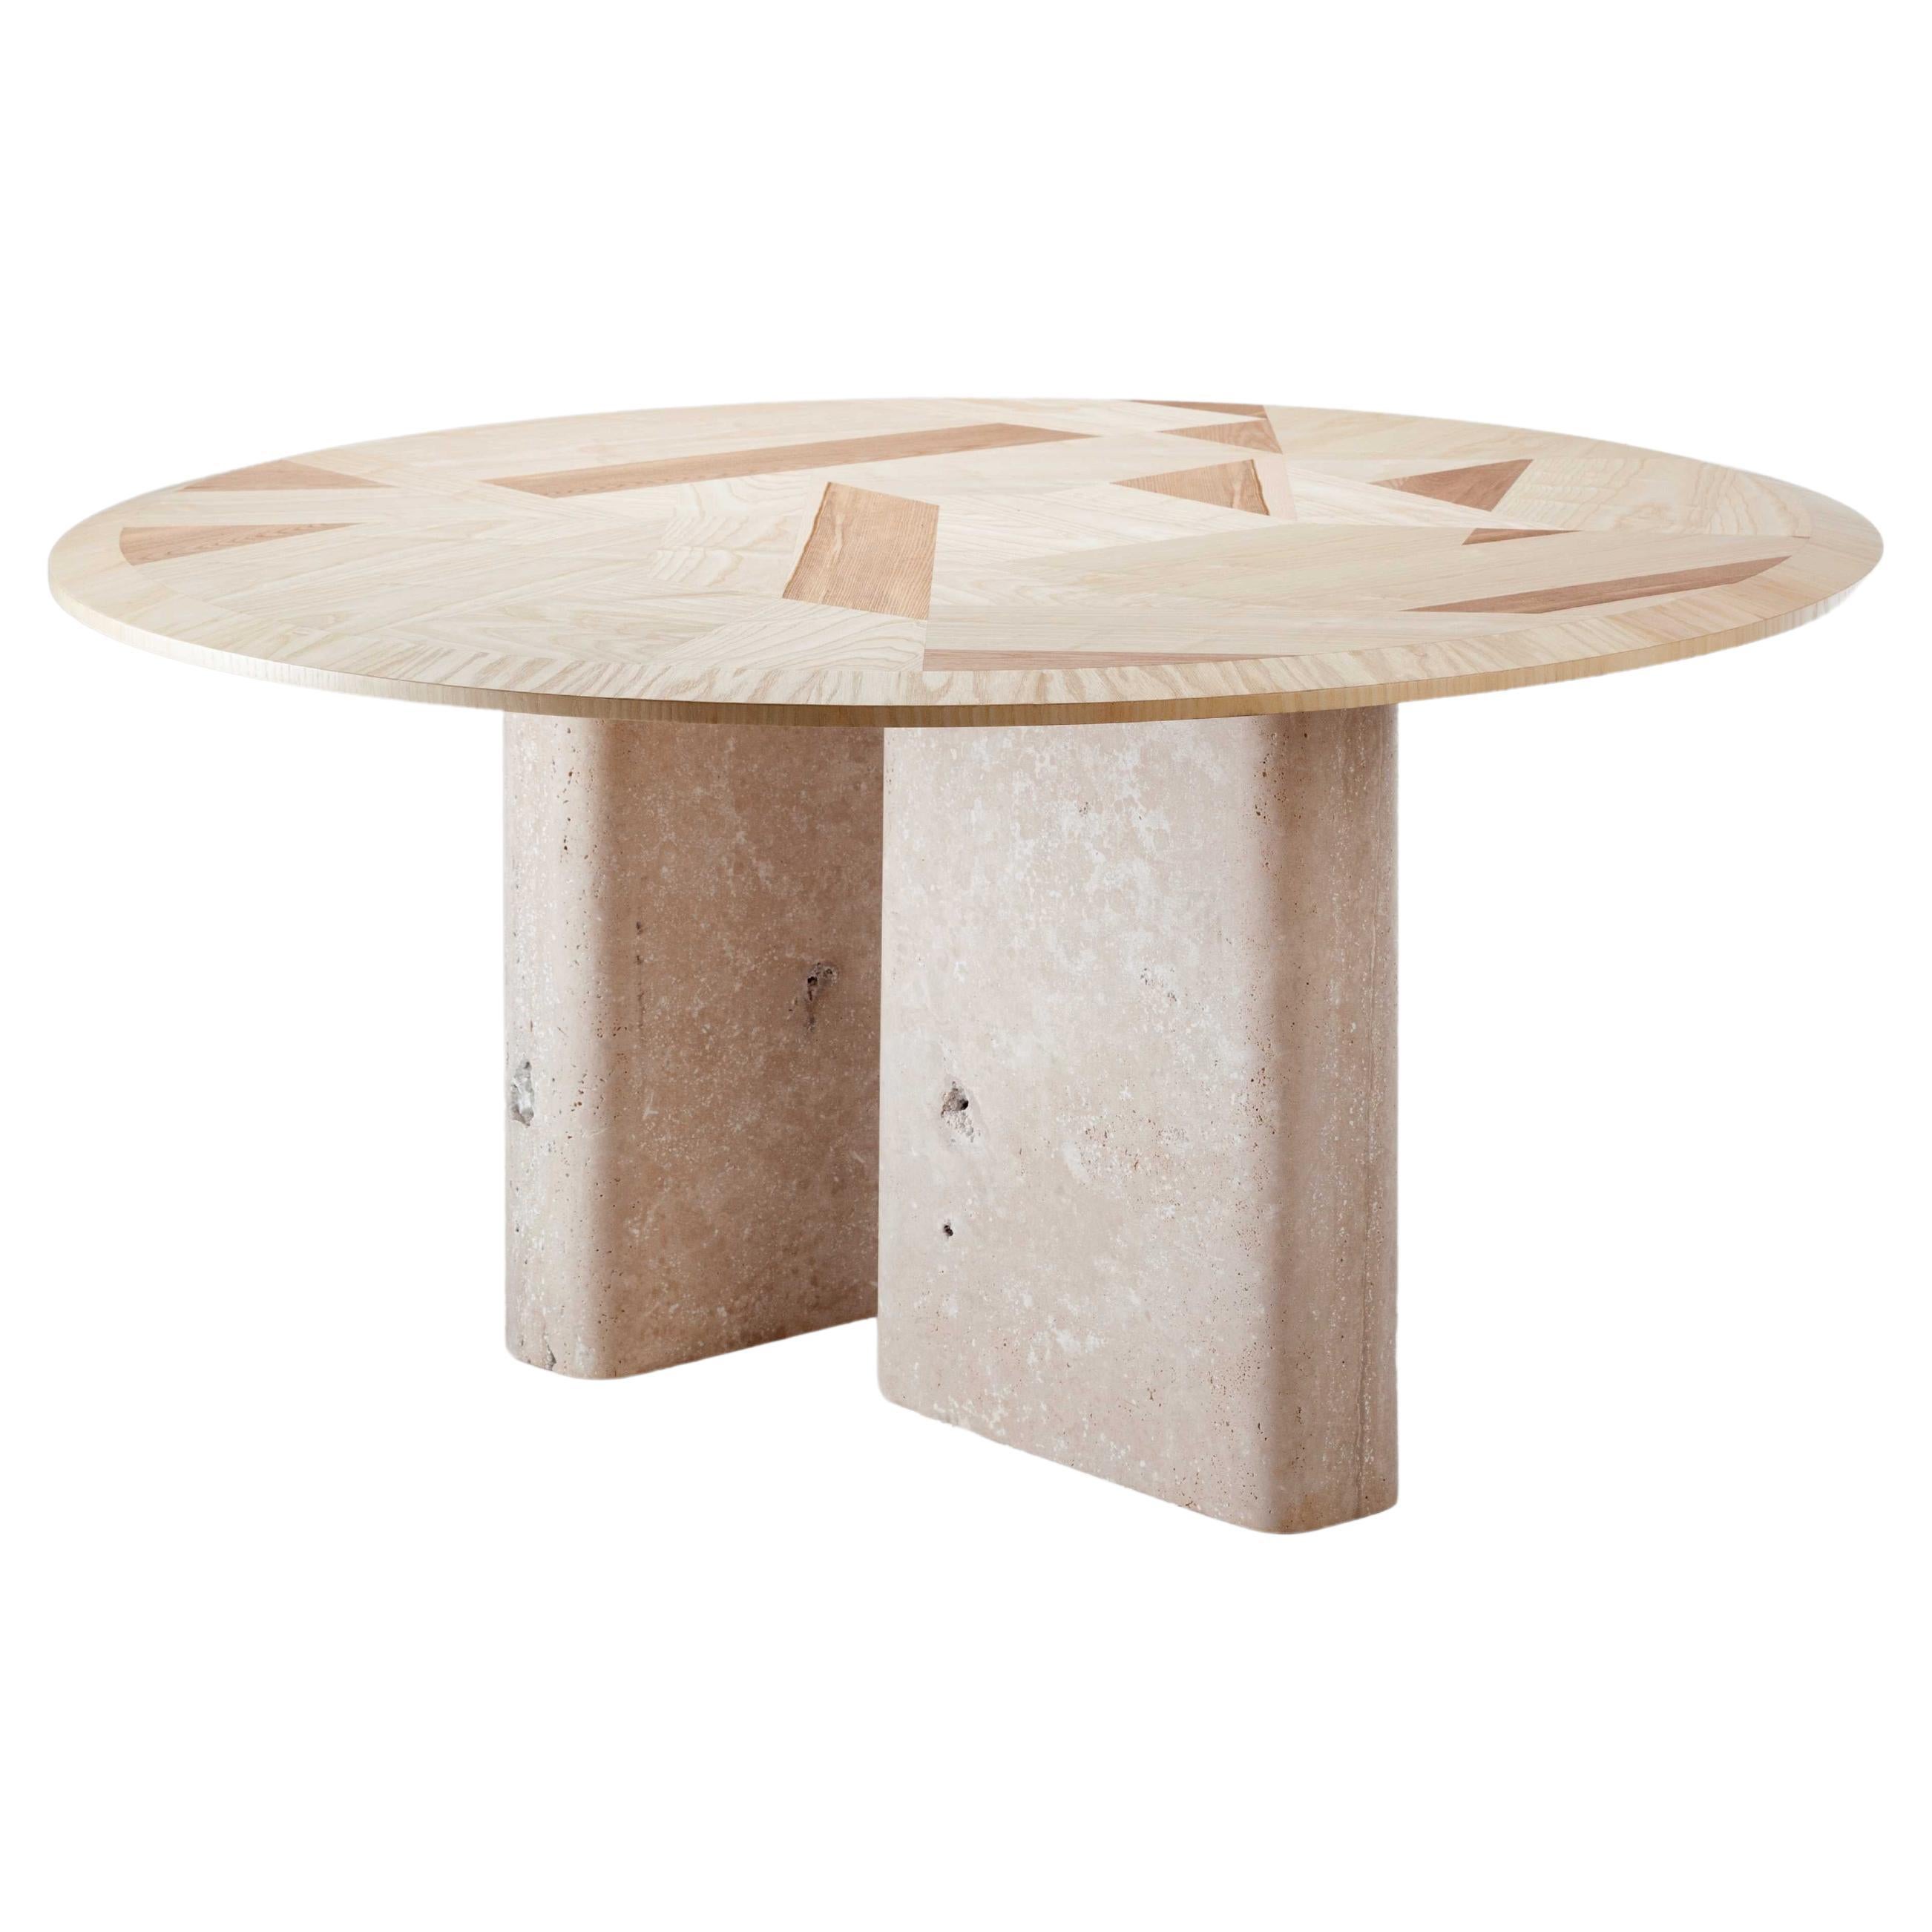 DOOQ Organic Modern Natural Olive Ash and Travertine Dining Table L'anamour, 120